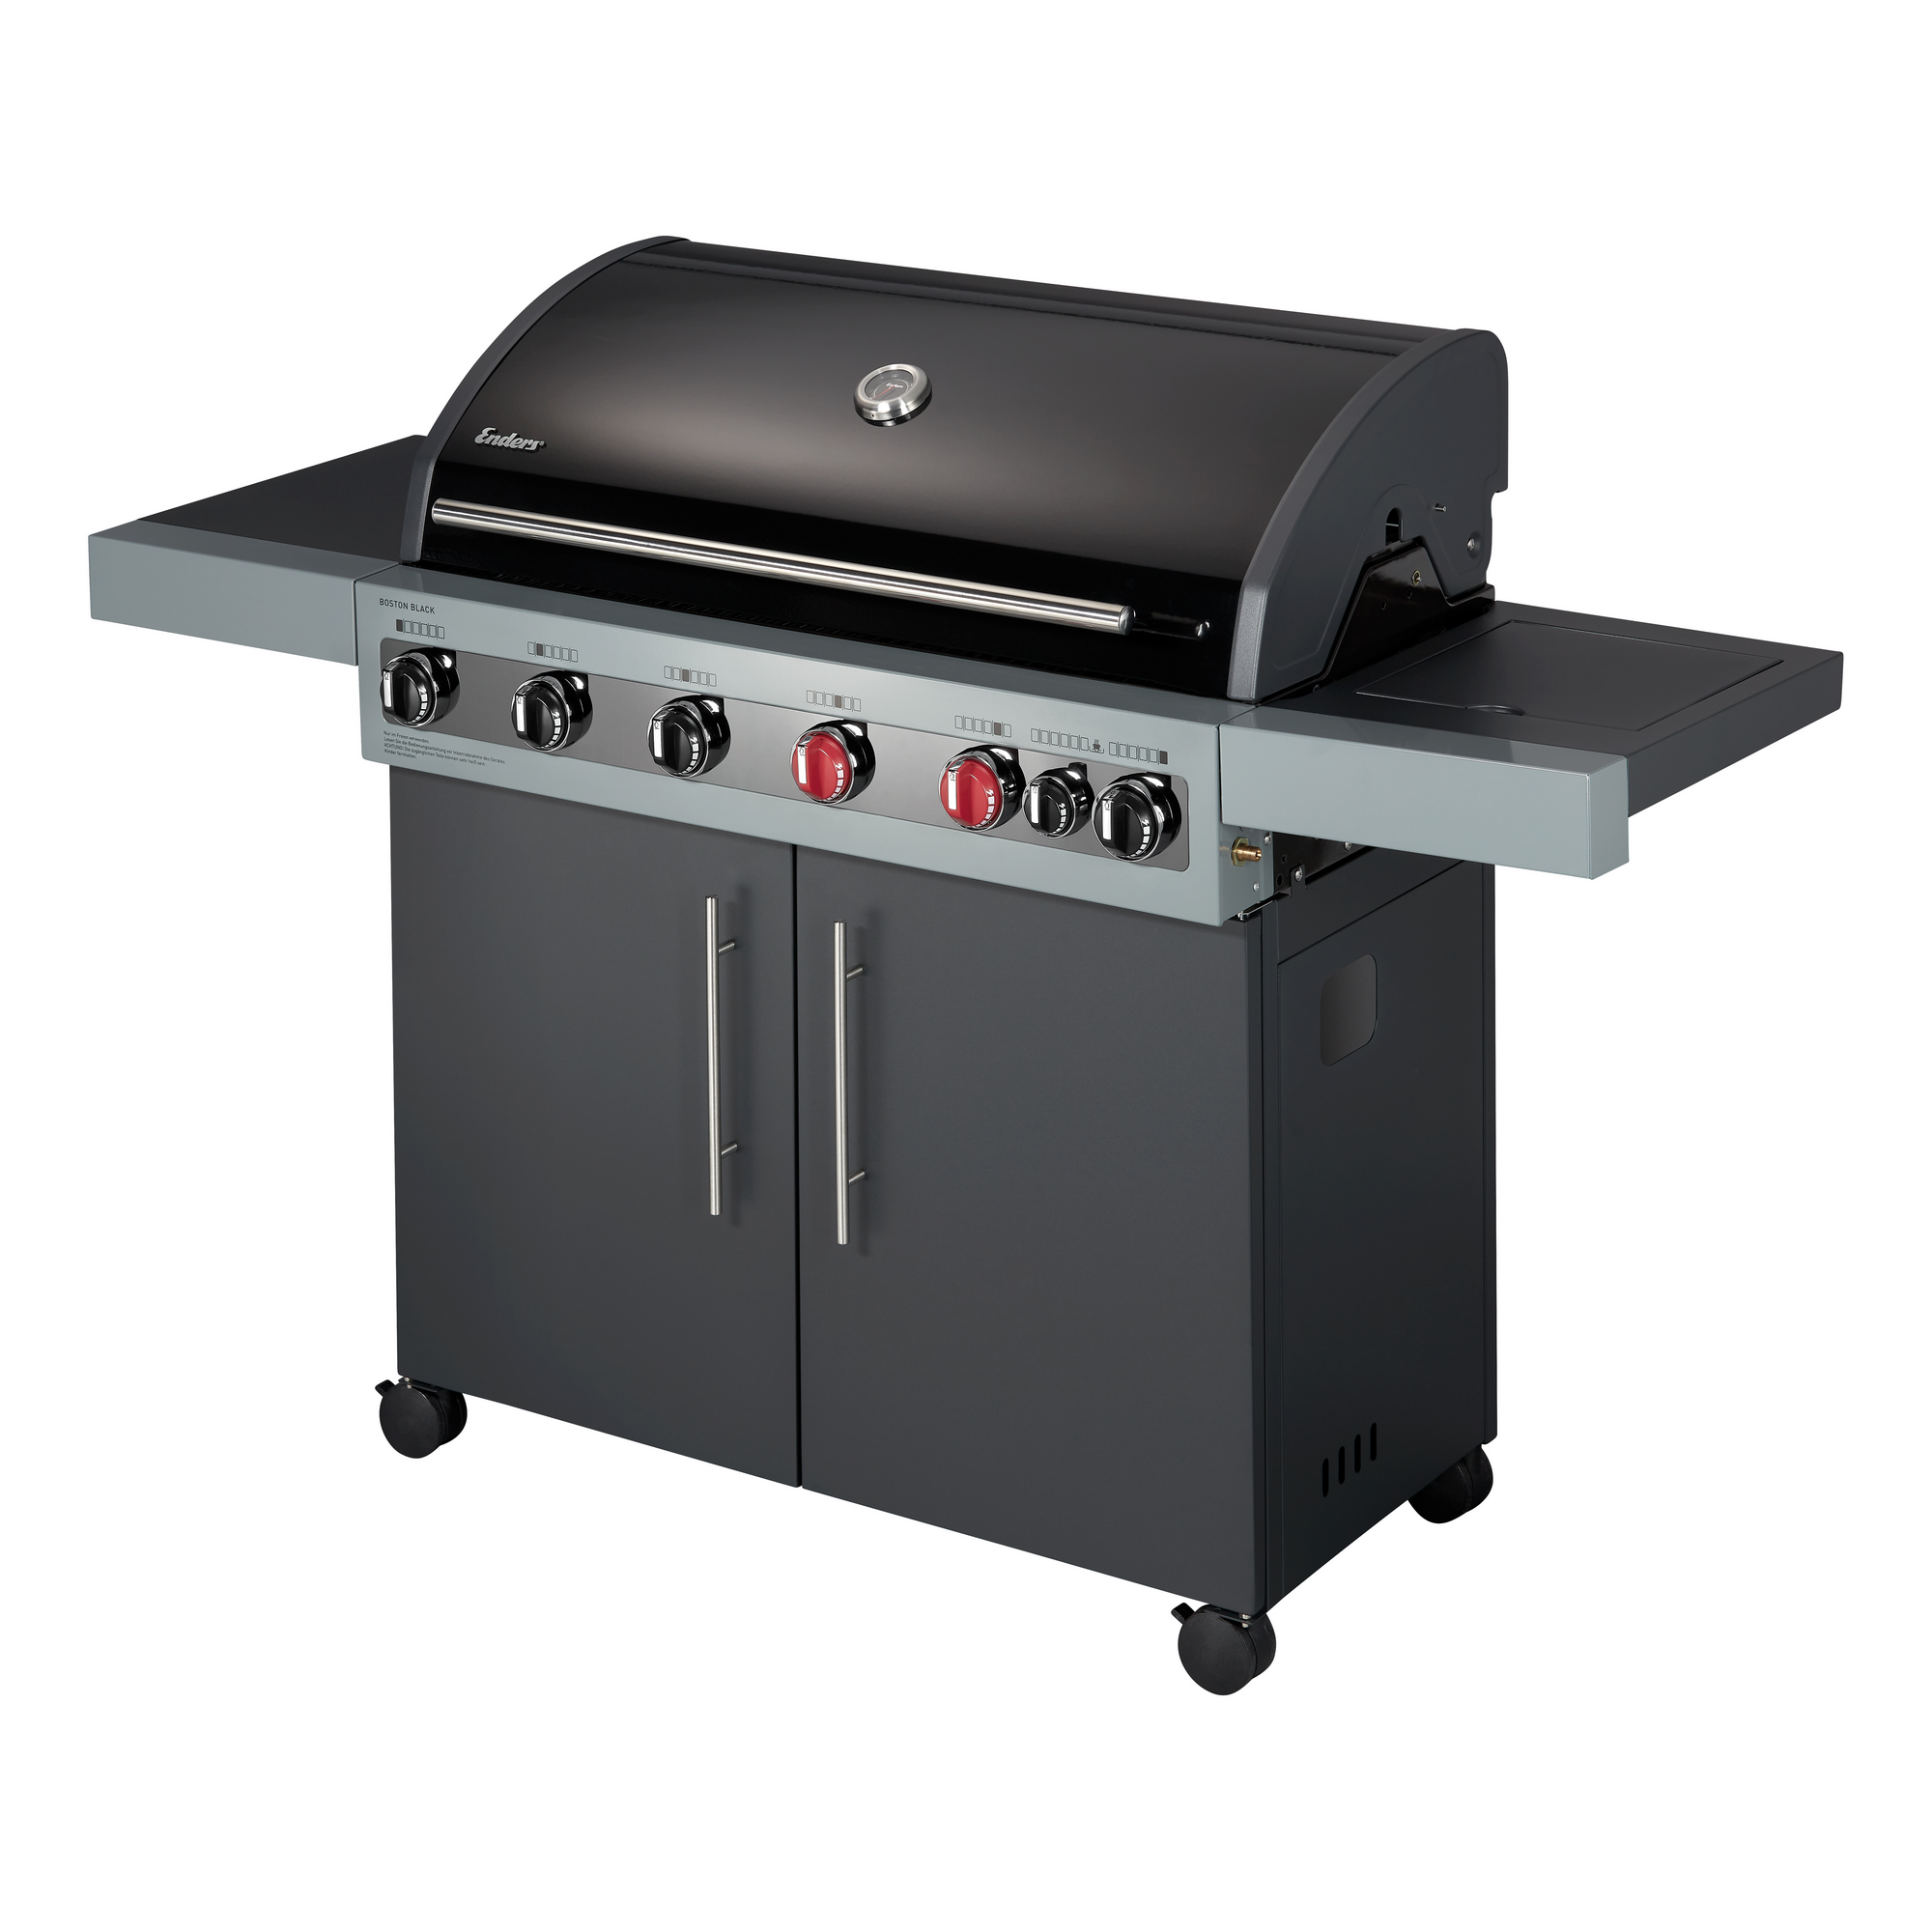 Gasgrill 'Boston Black 6 KR Turbo' 6 Brenner + product picture